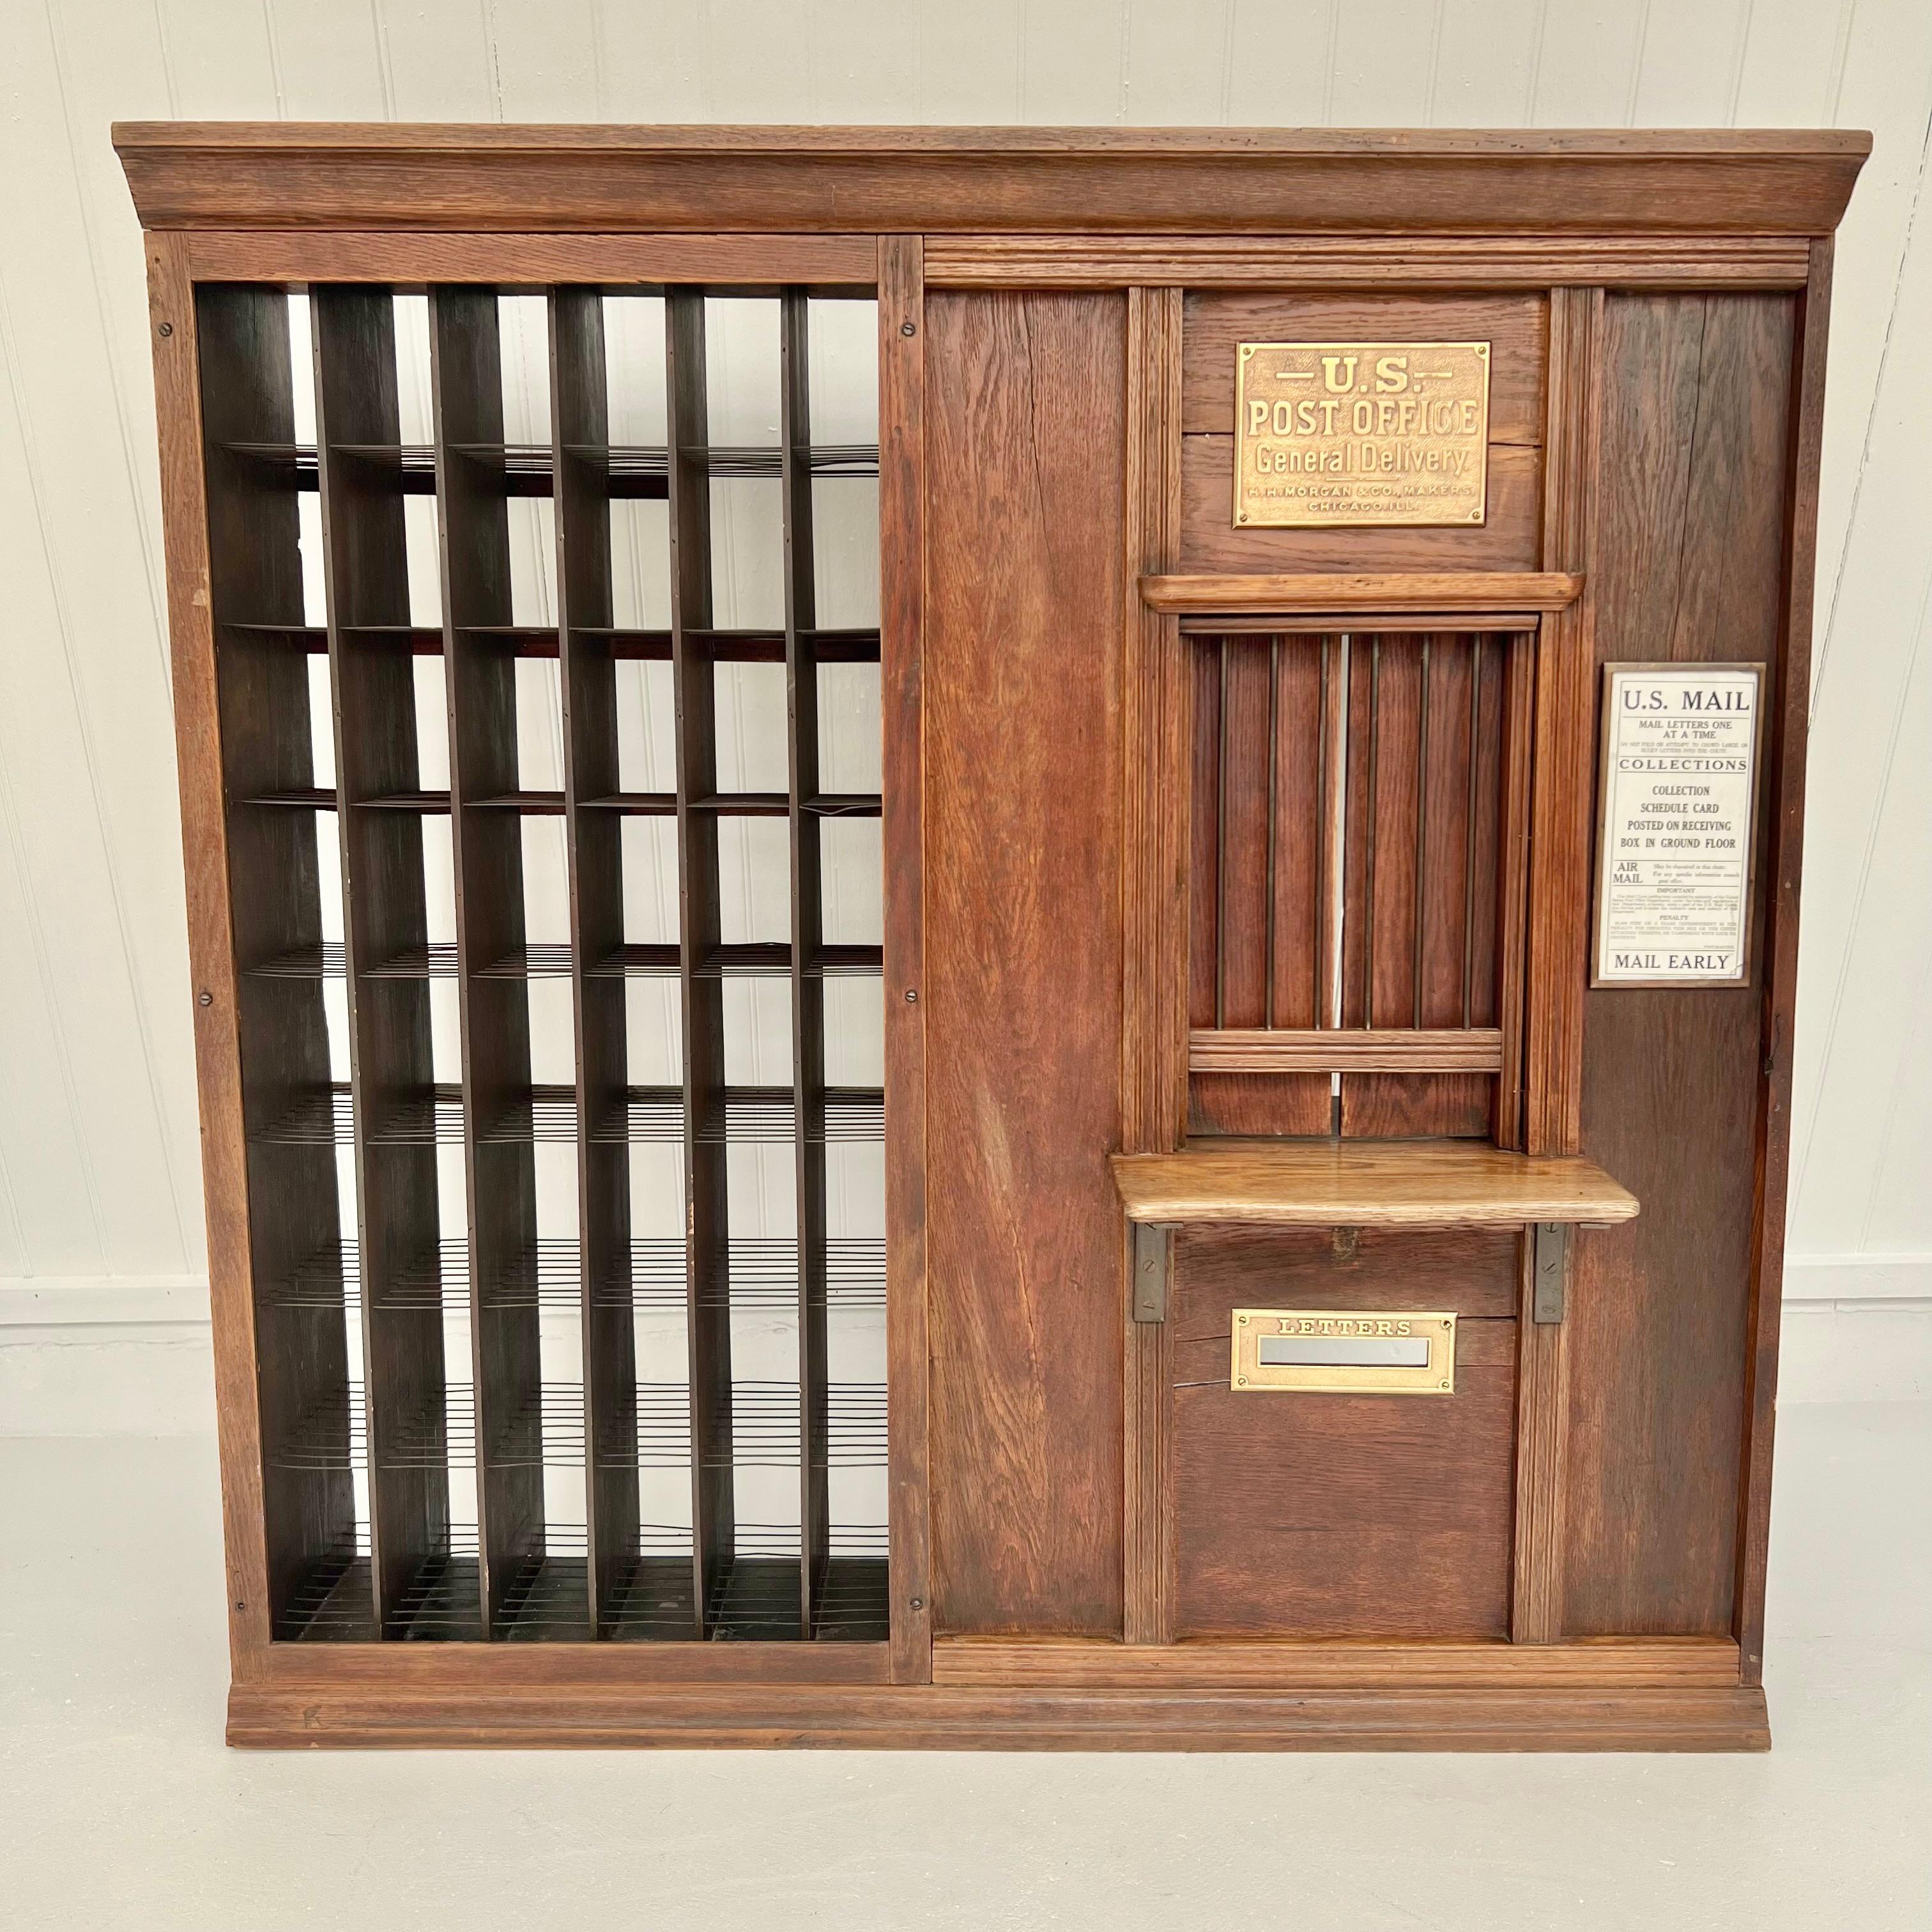 A wonderfully unique U.S. Post Office postal window with teller's cage from the late 19th century. Most likely used in a country store. Original finish oak wood. Brass plate reads 'H.H. Morgan & Co. Makers, Chicago, ILL'. Smaller oak window with